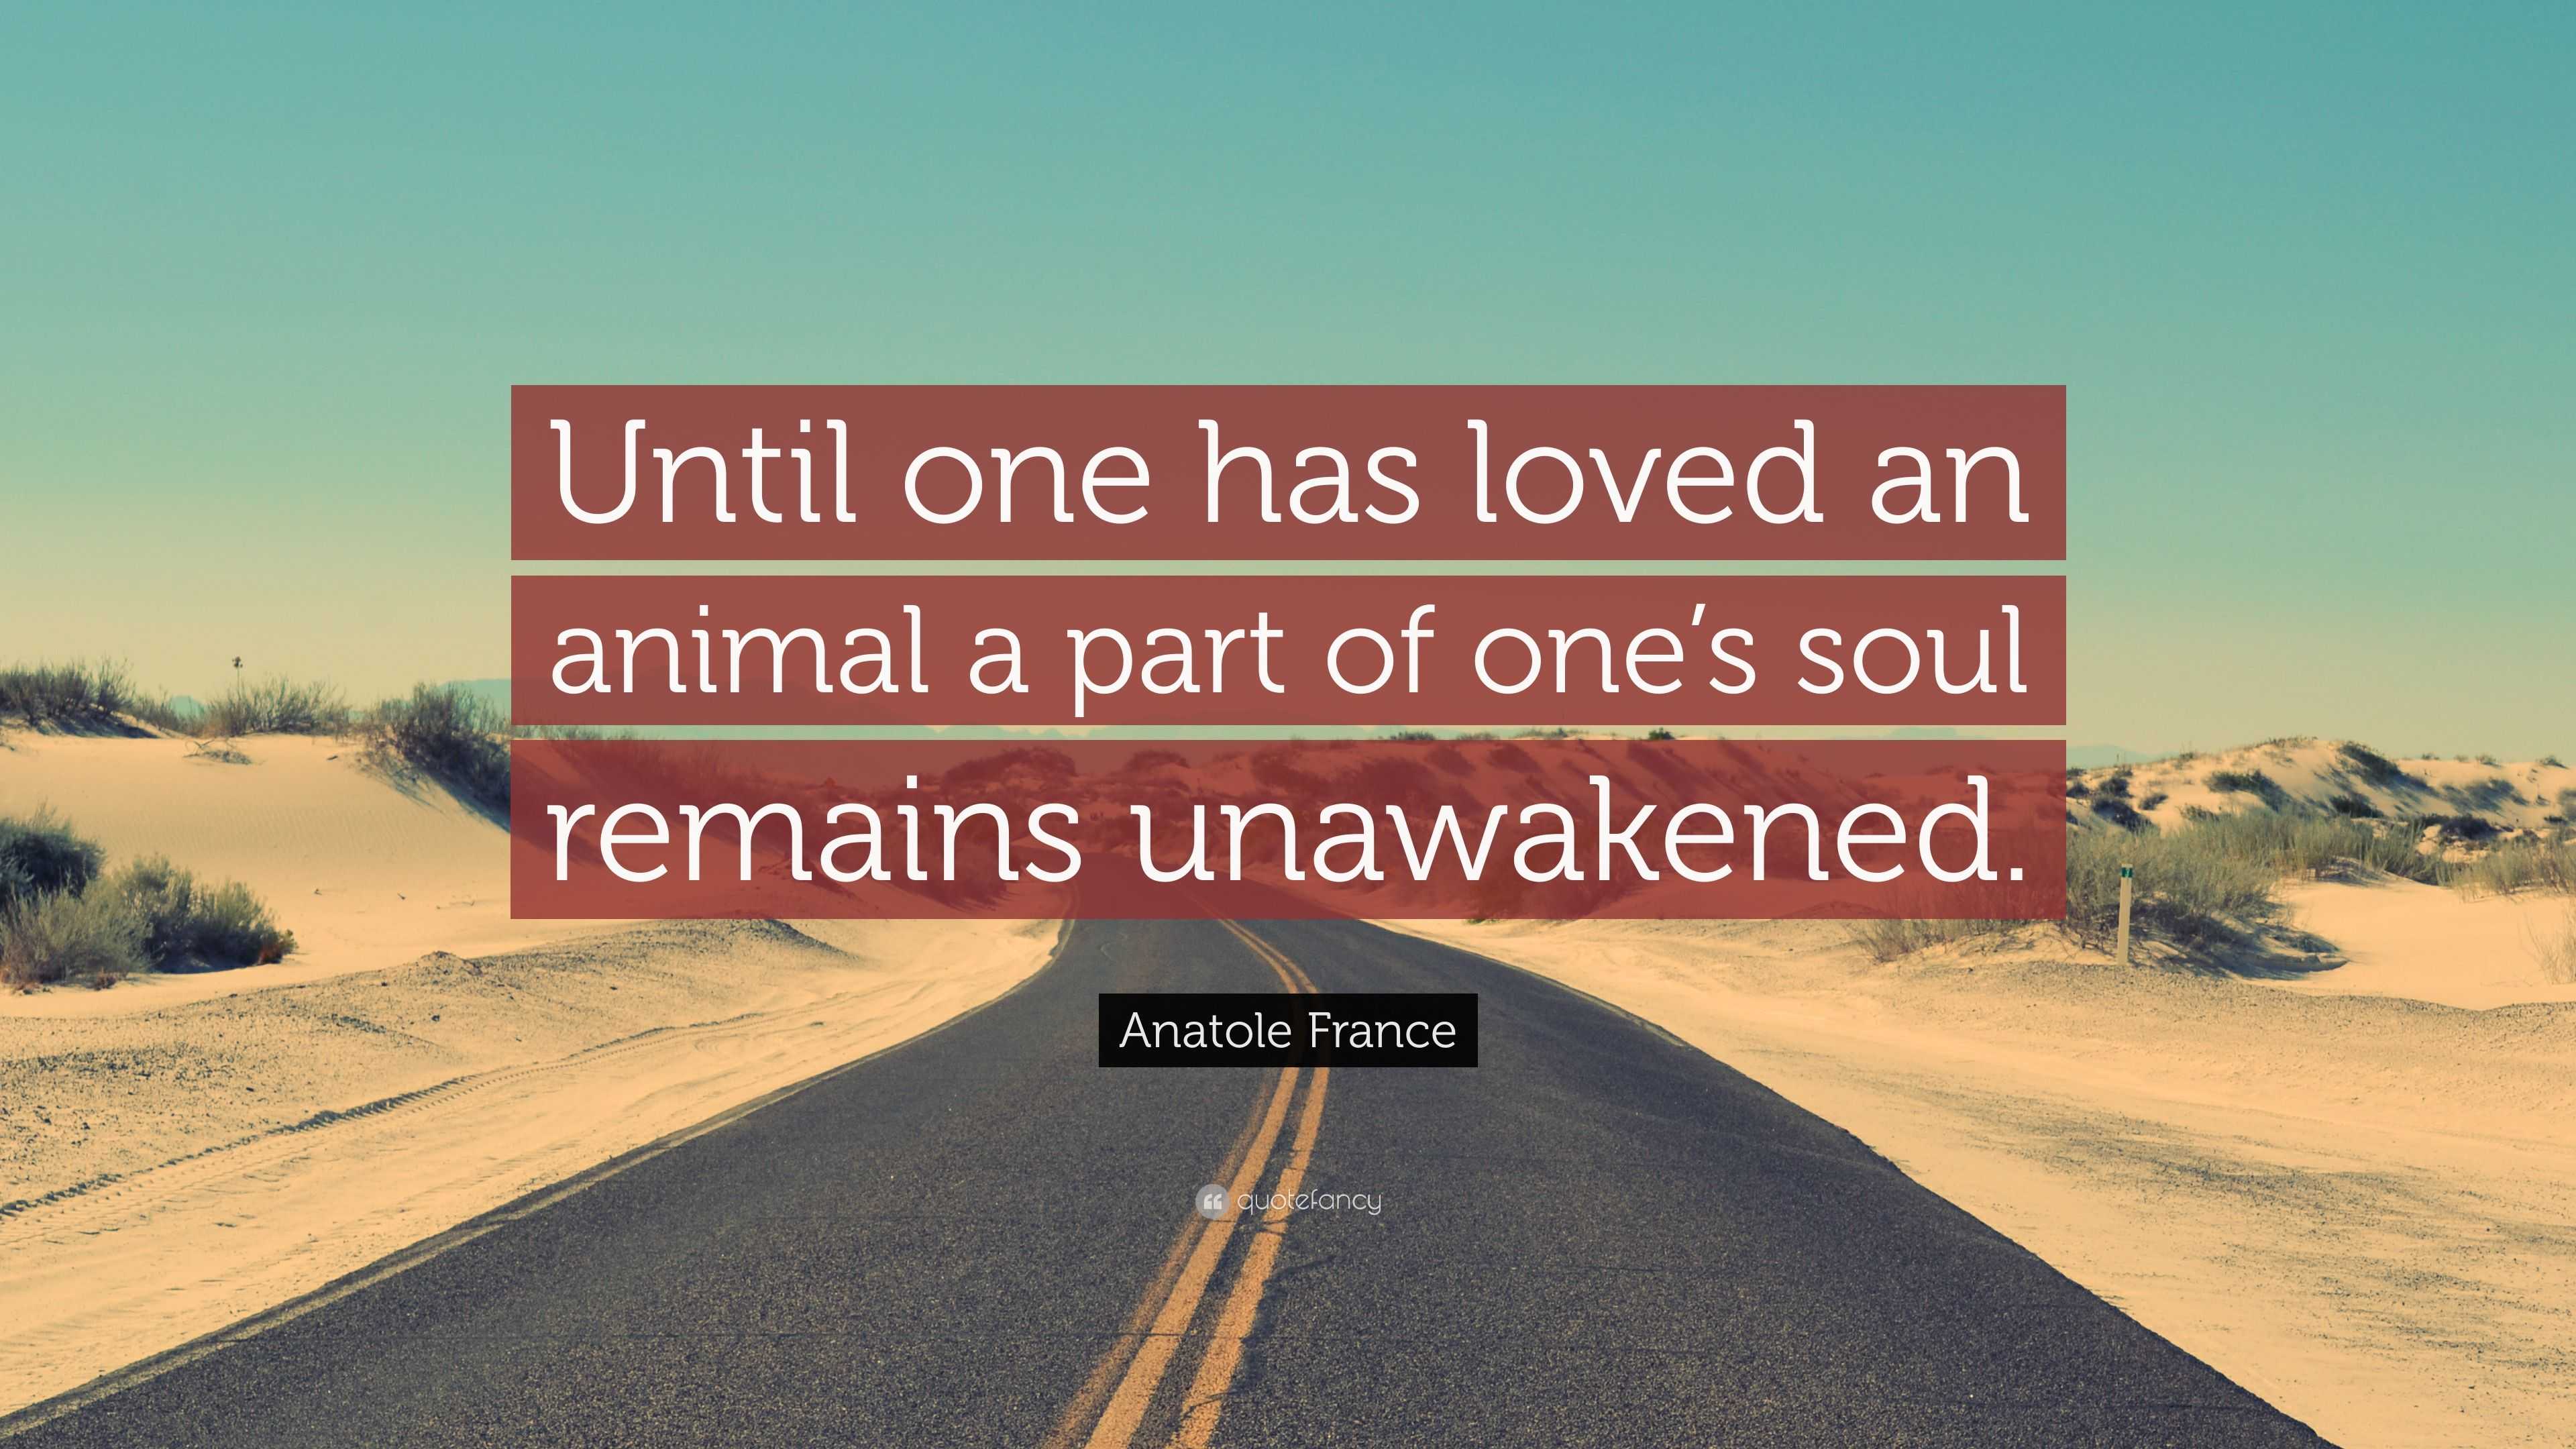 Anatole France Quote “Until one has loved an animal a part of one s soul